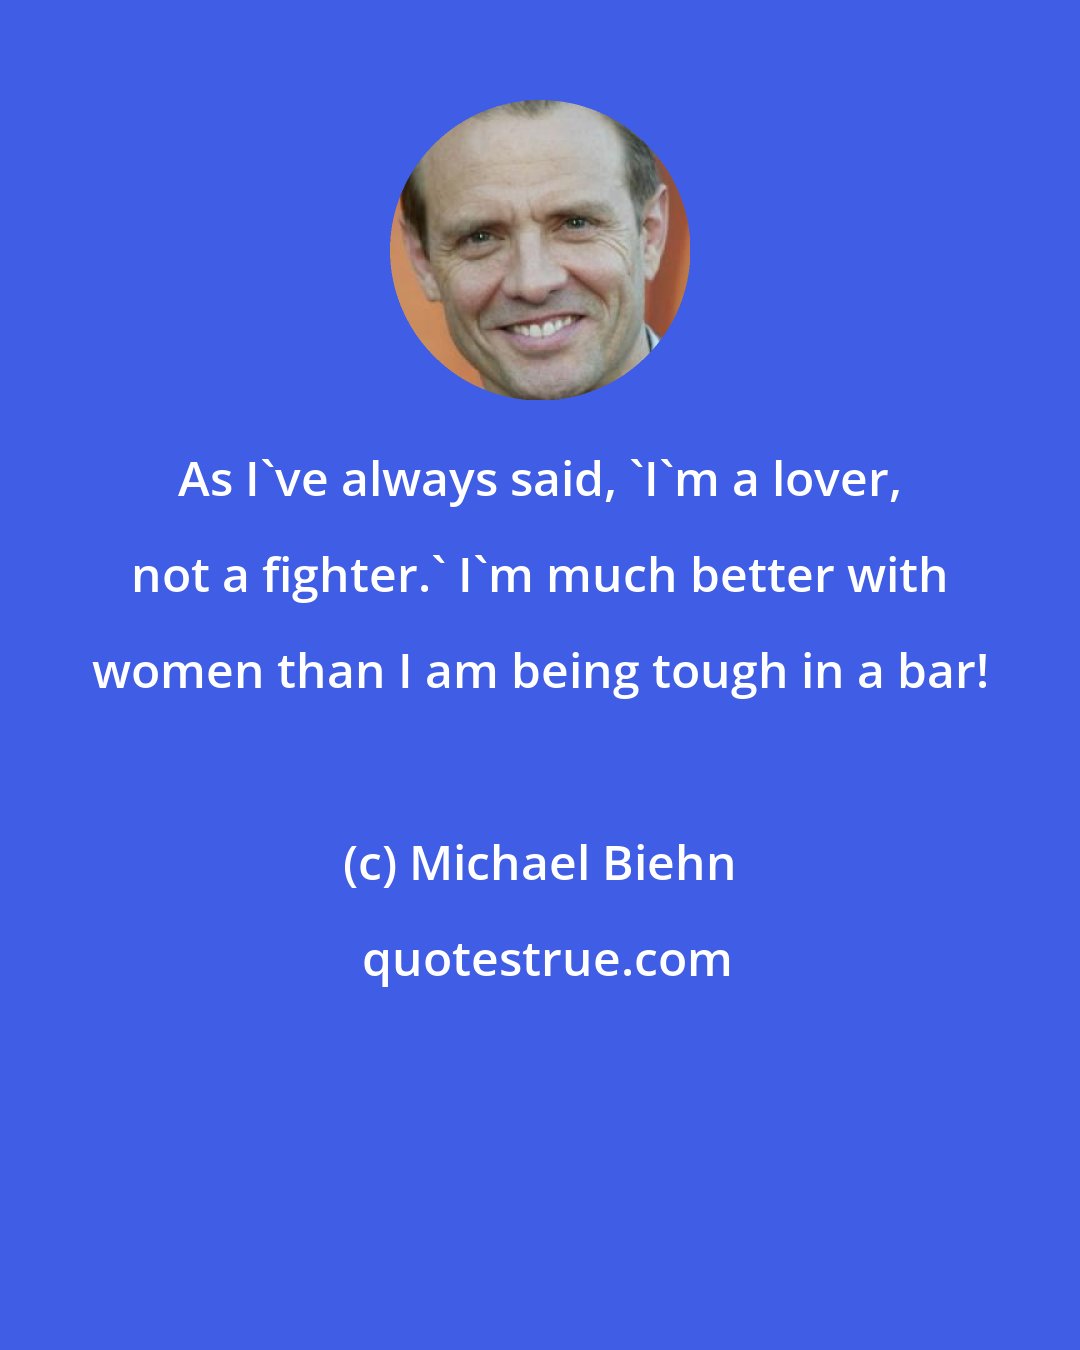 Michael Biehn: As I've always said, 'I'm a lover, not a fighter.' I'm much better with women than I am being tough in a bar!